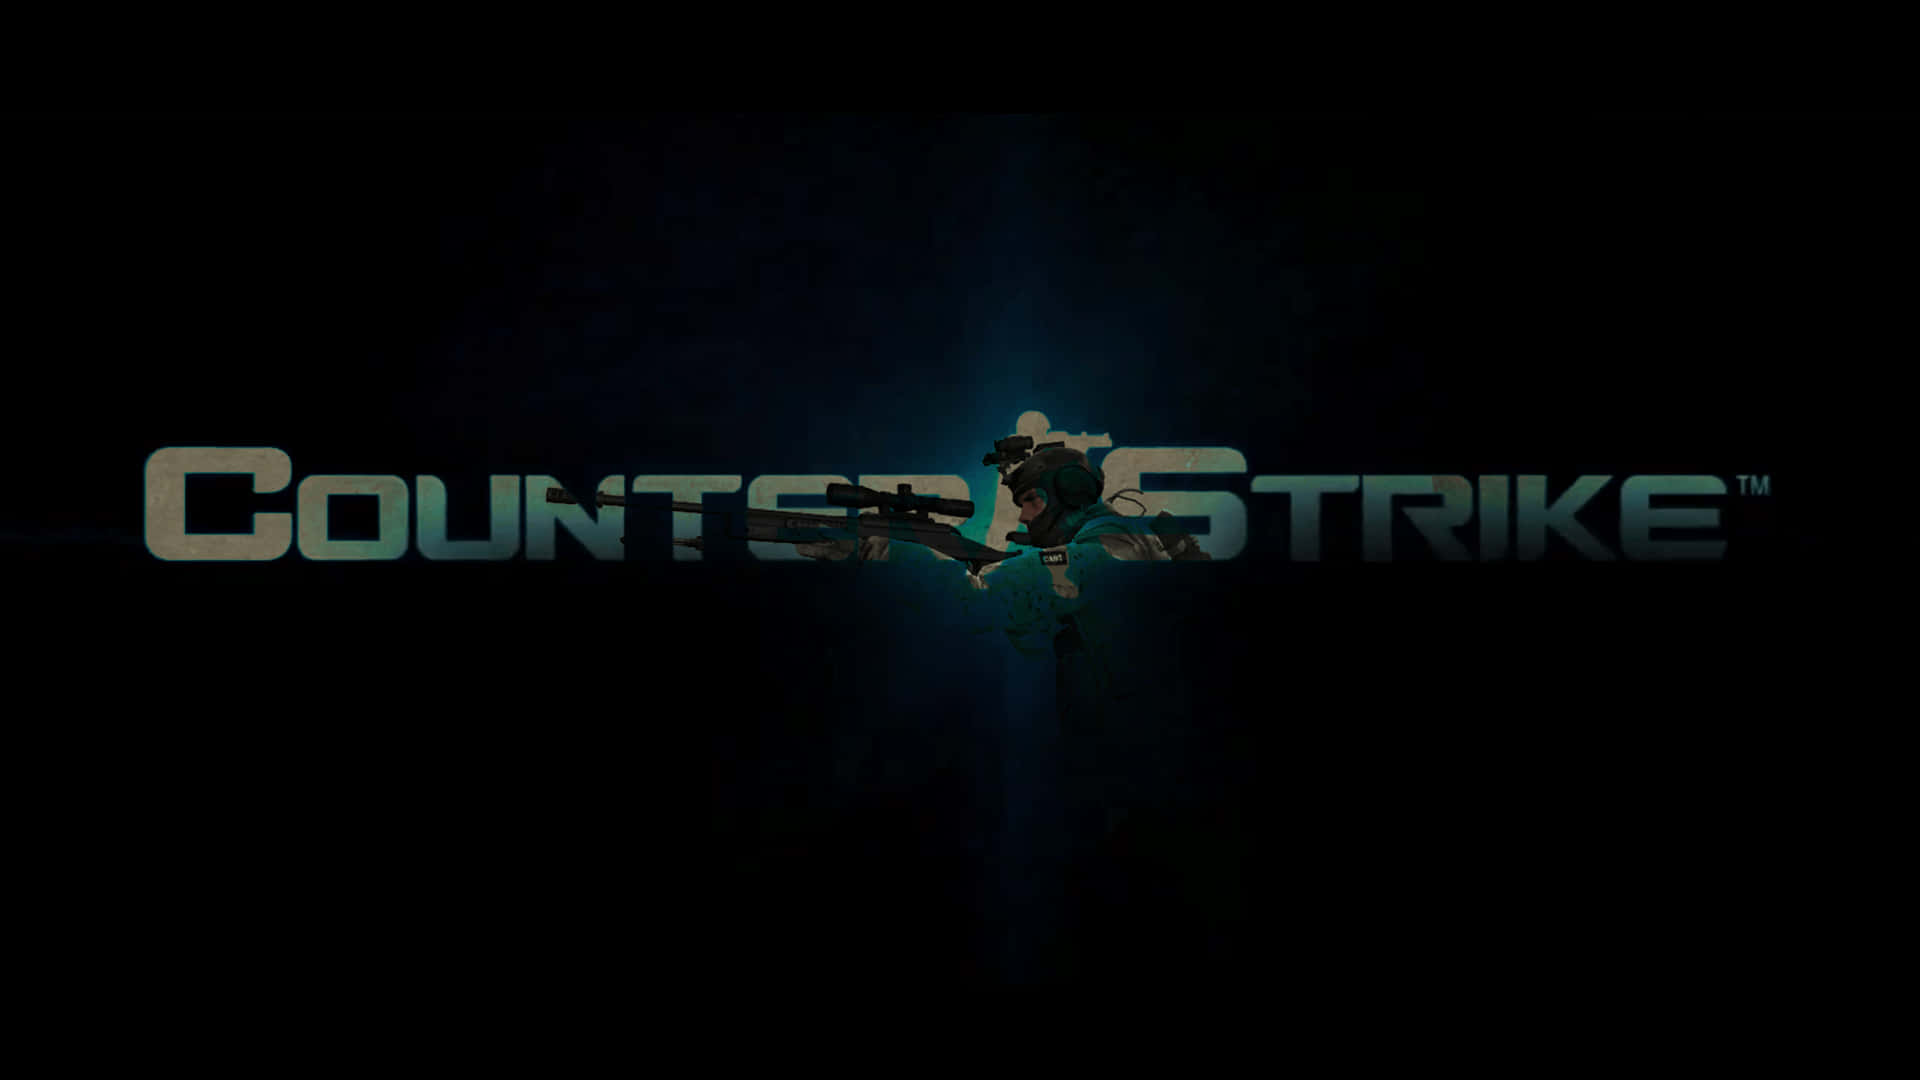 The Logo For Counter Strike On A Dark Background Wallpaper